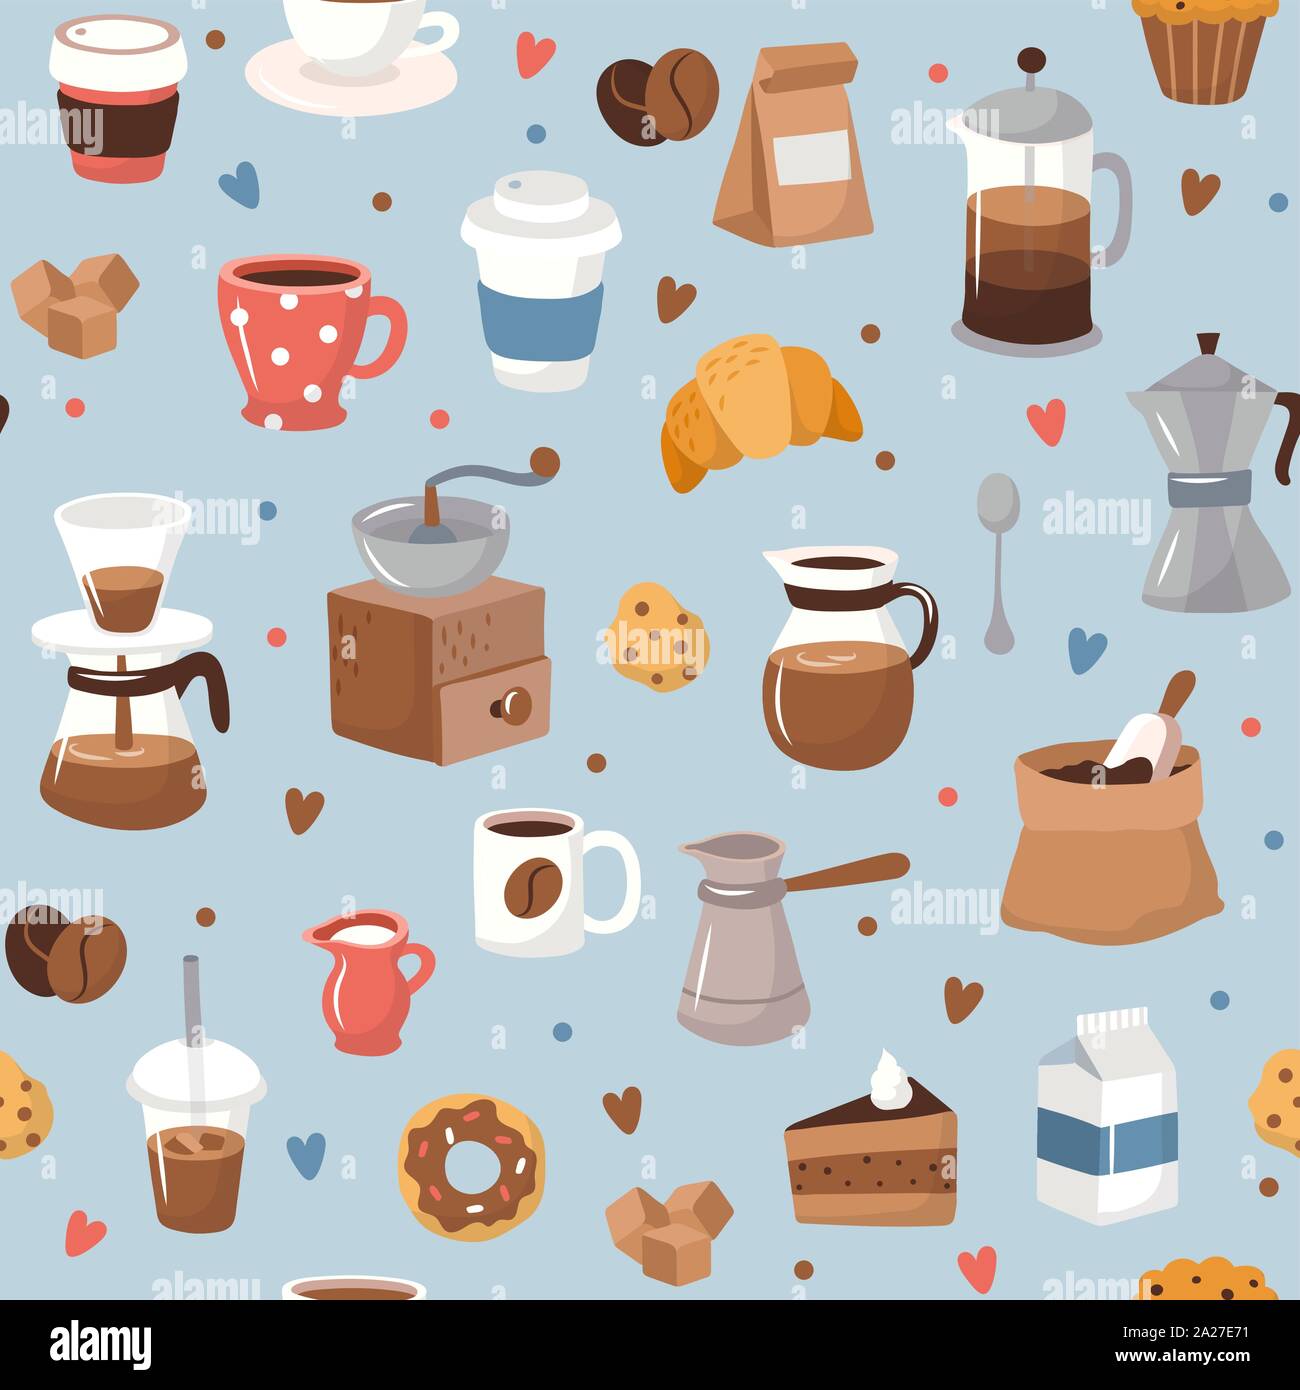 https://c8.alamy.com/comp/2A27E71/coffee-pattern-different-coffee-elements-cute-cartoon-icons-in-hand-drawn-style-on-blue-background-vector-illustration-2A27E71.jpg